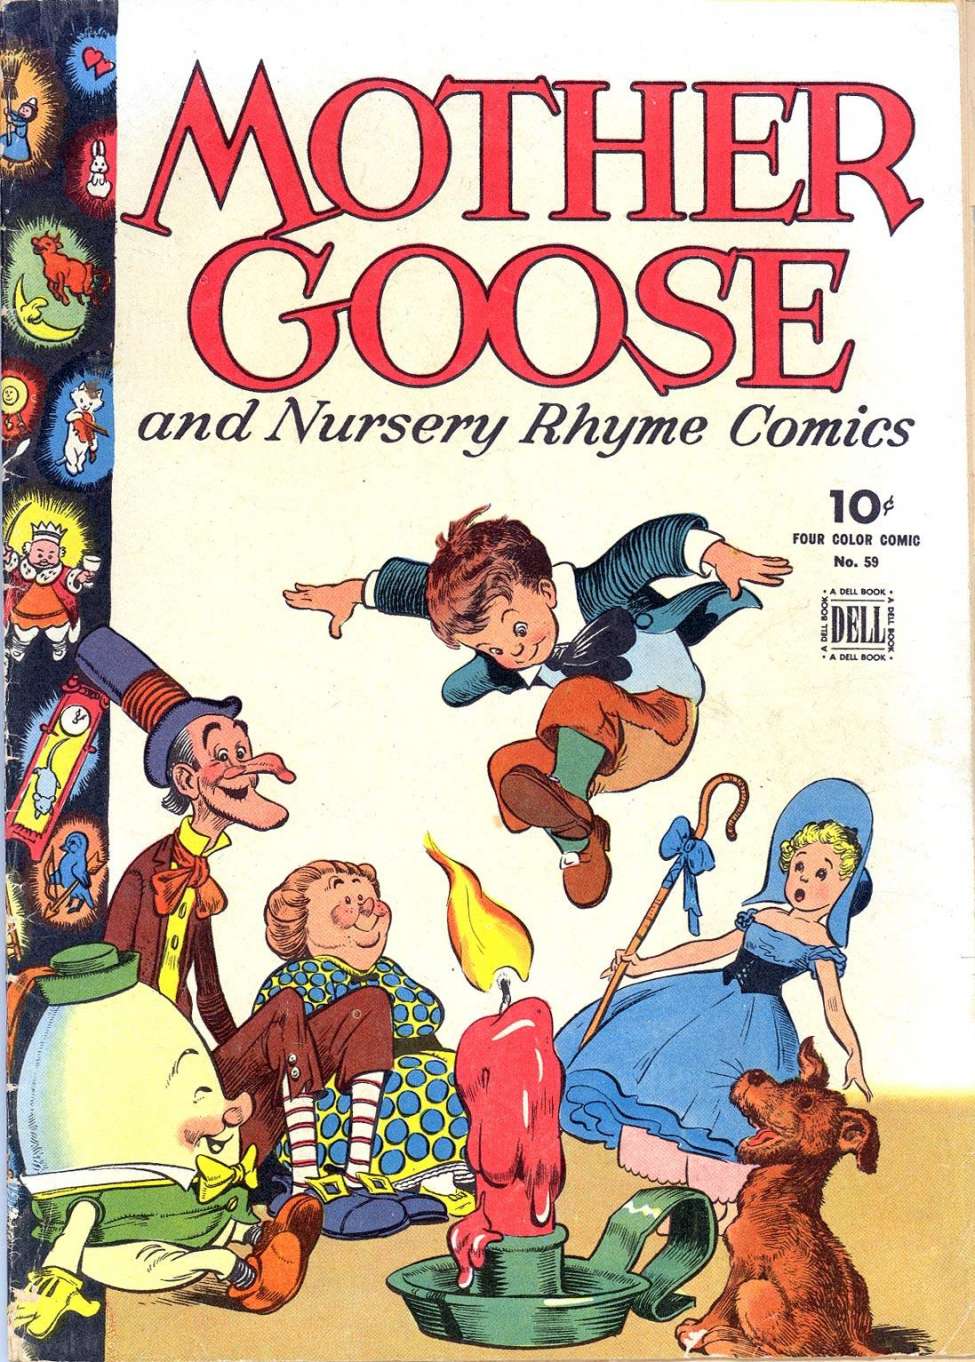 Book Cover For 0059 - Mother Goose